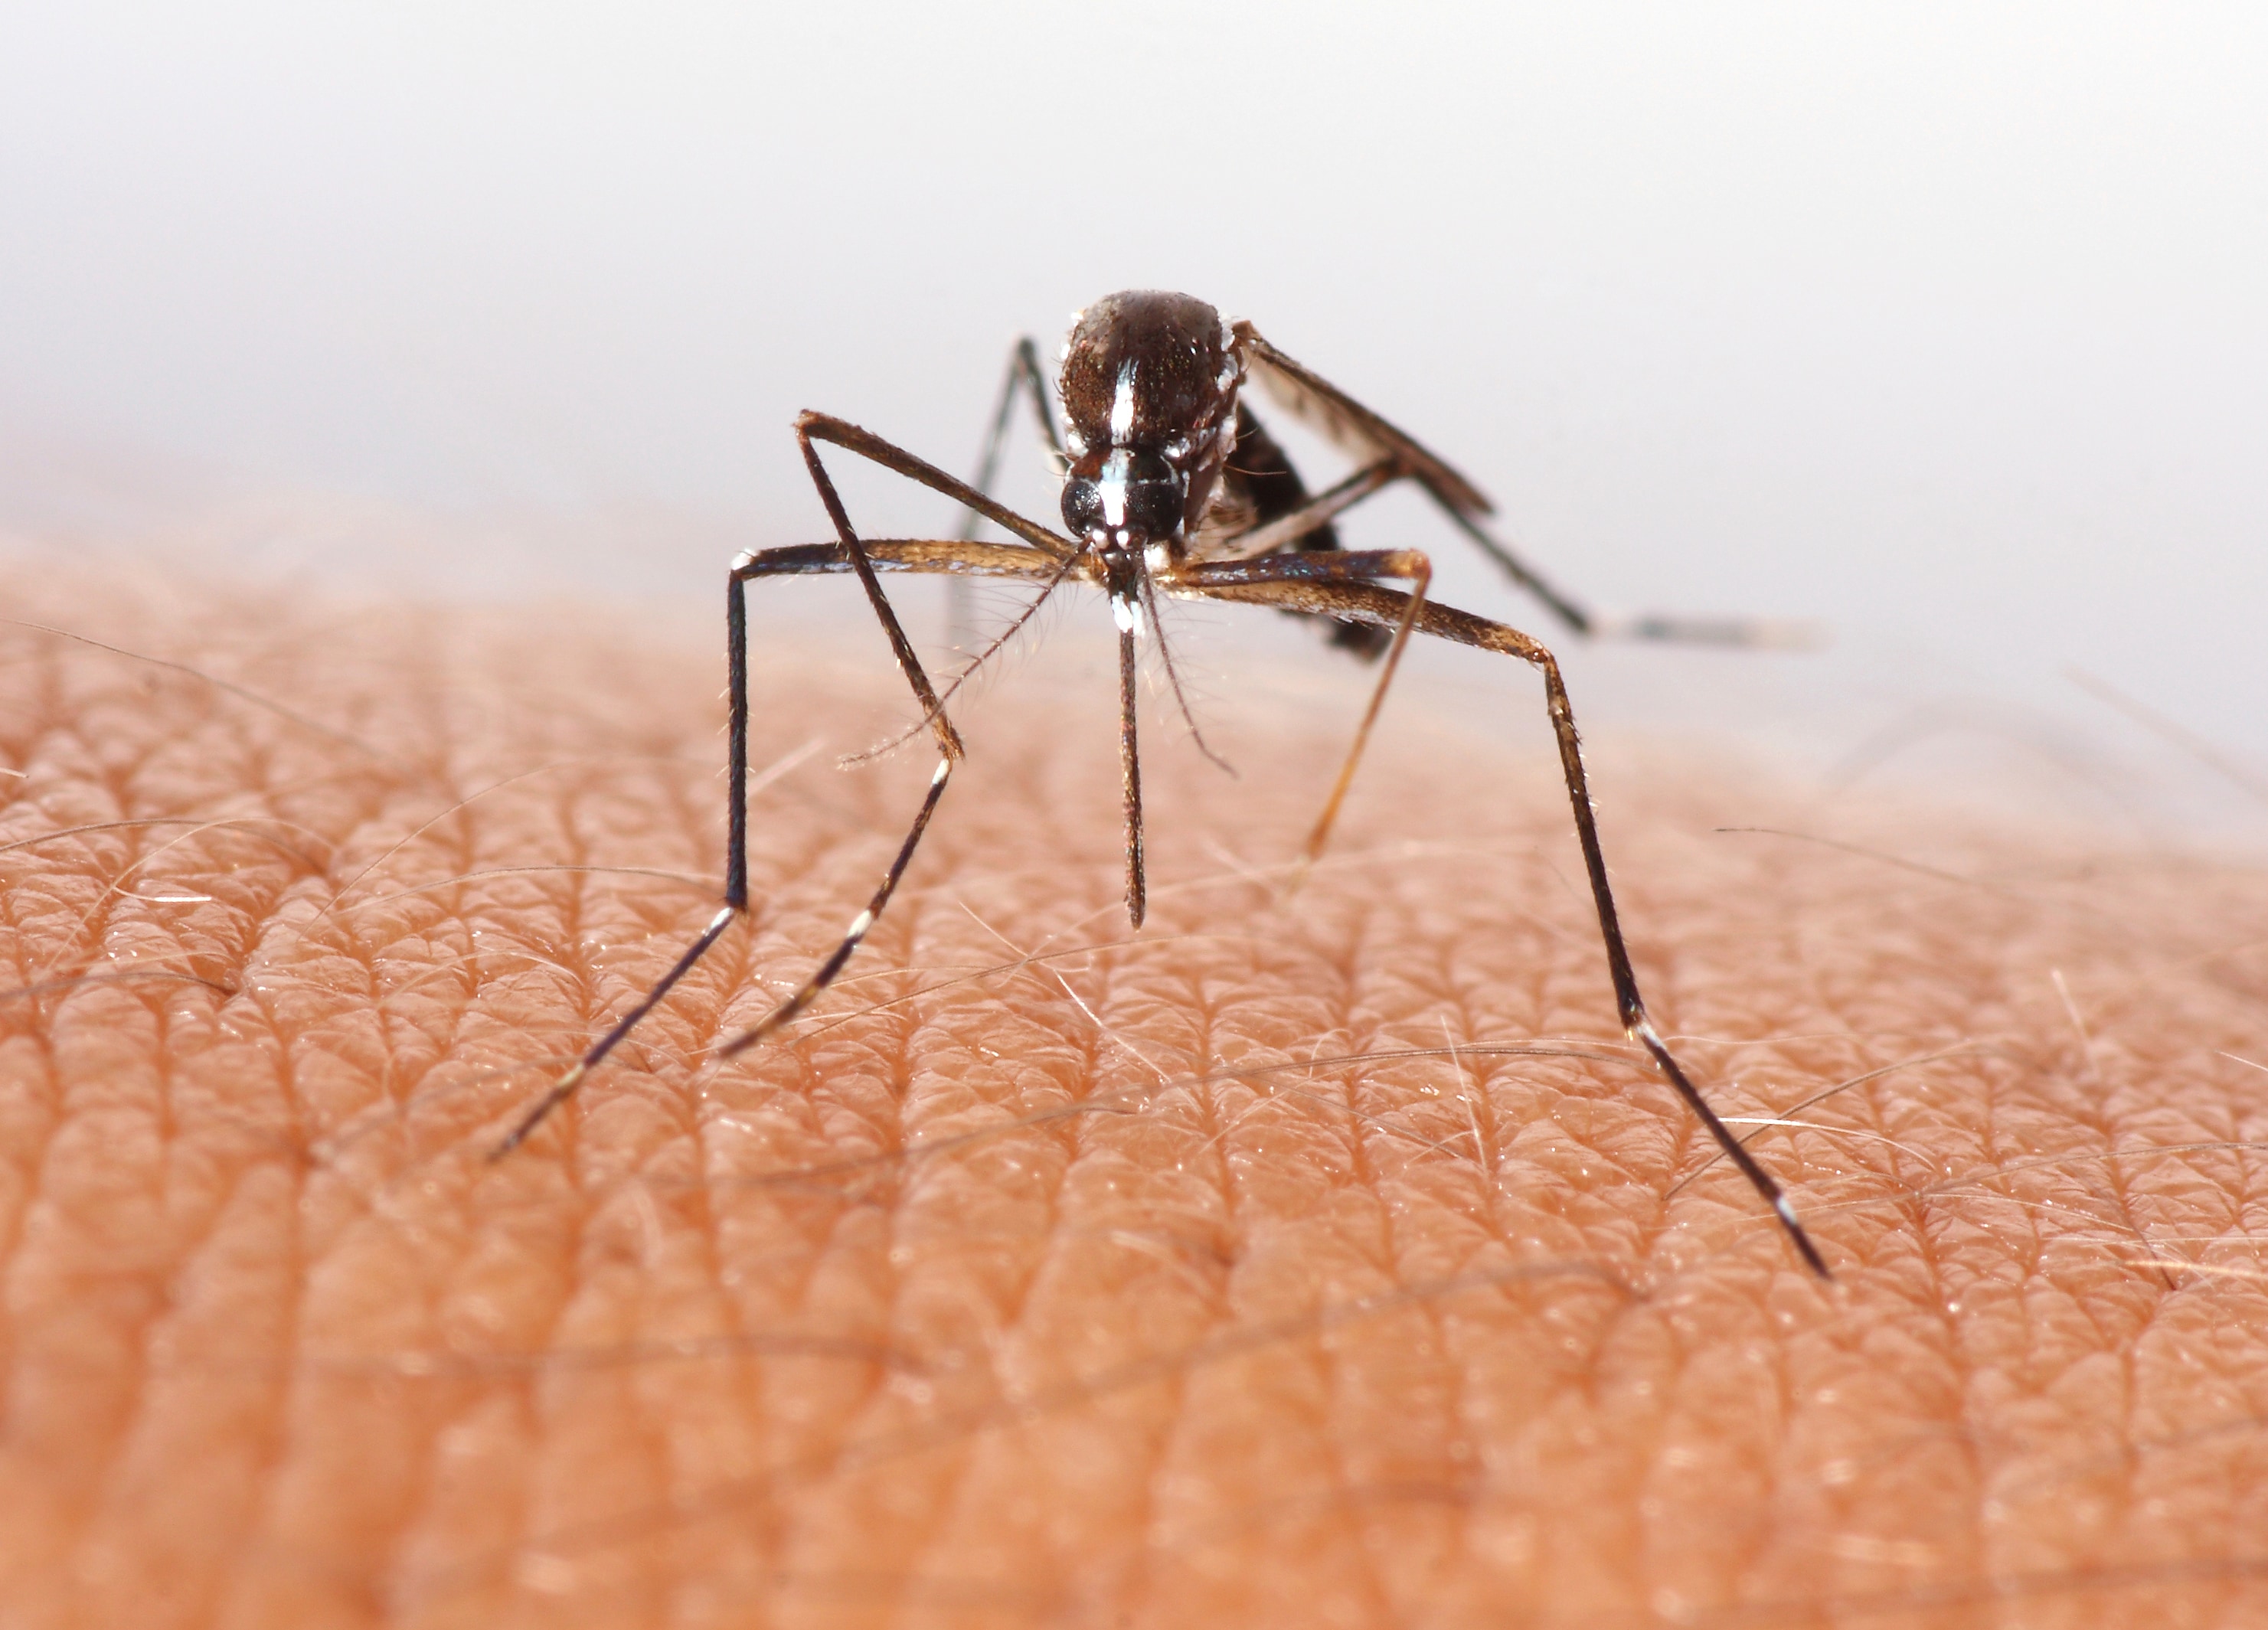 https://www.sydney.edu.au/content/dam/corporate/images/news-and-opinion/news/2015/december/mosquito.jpg